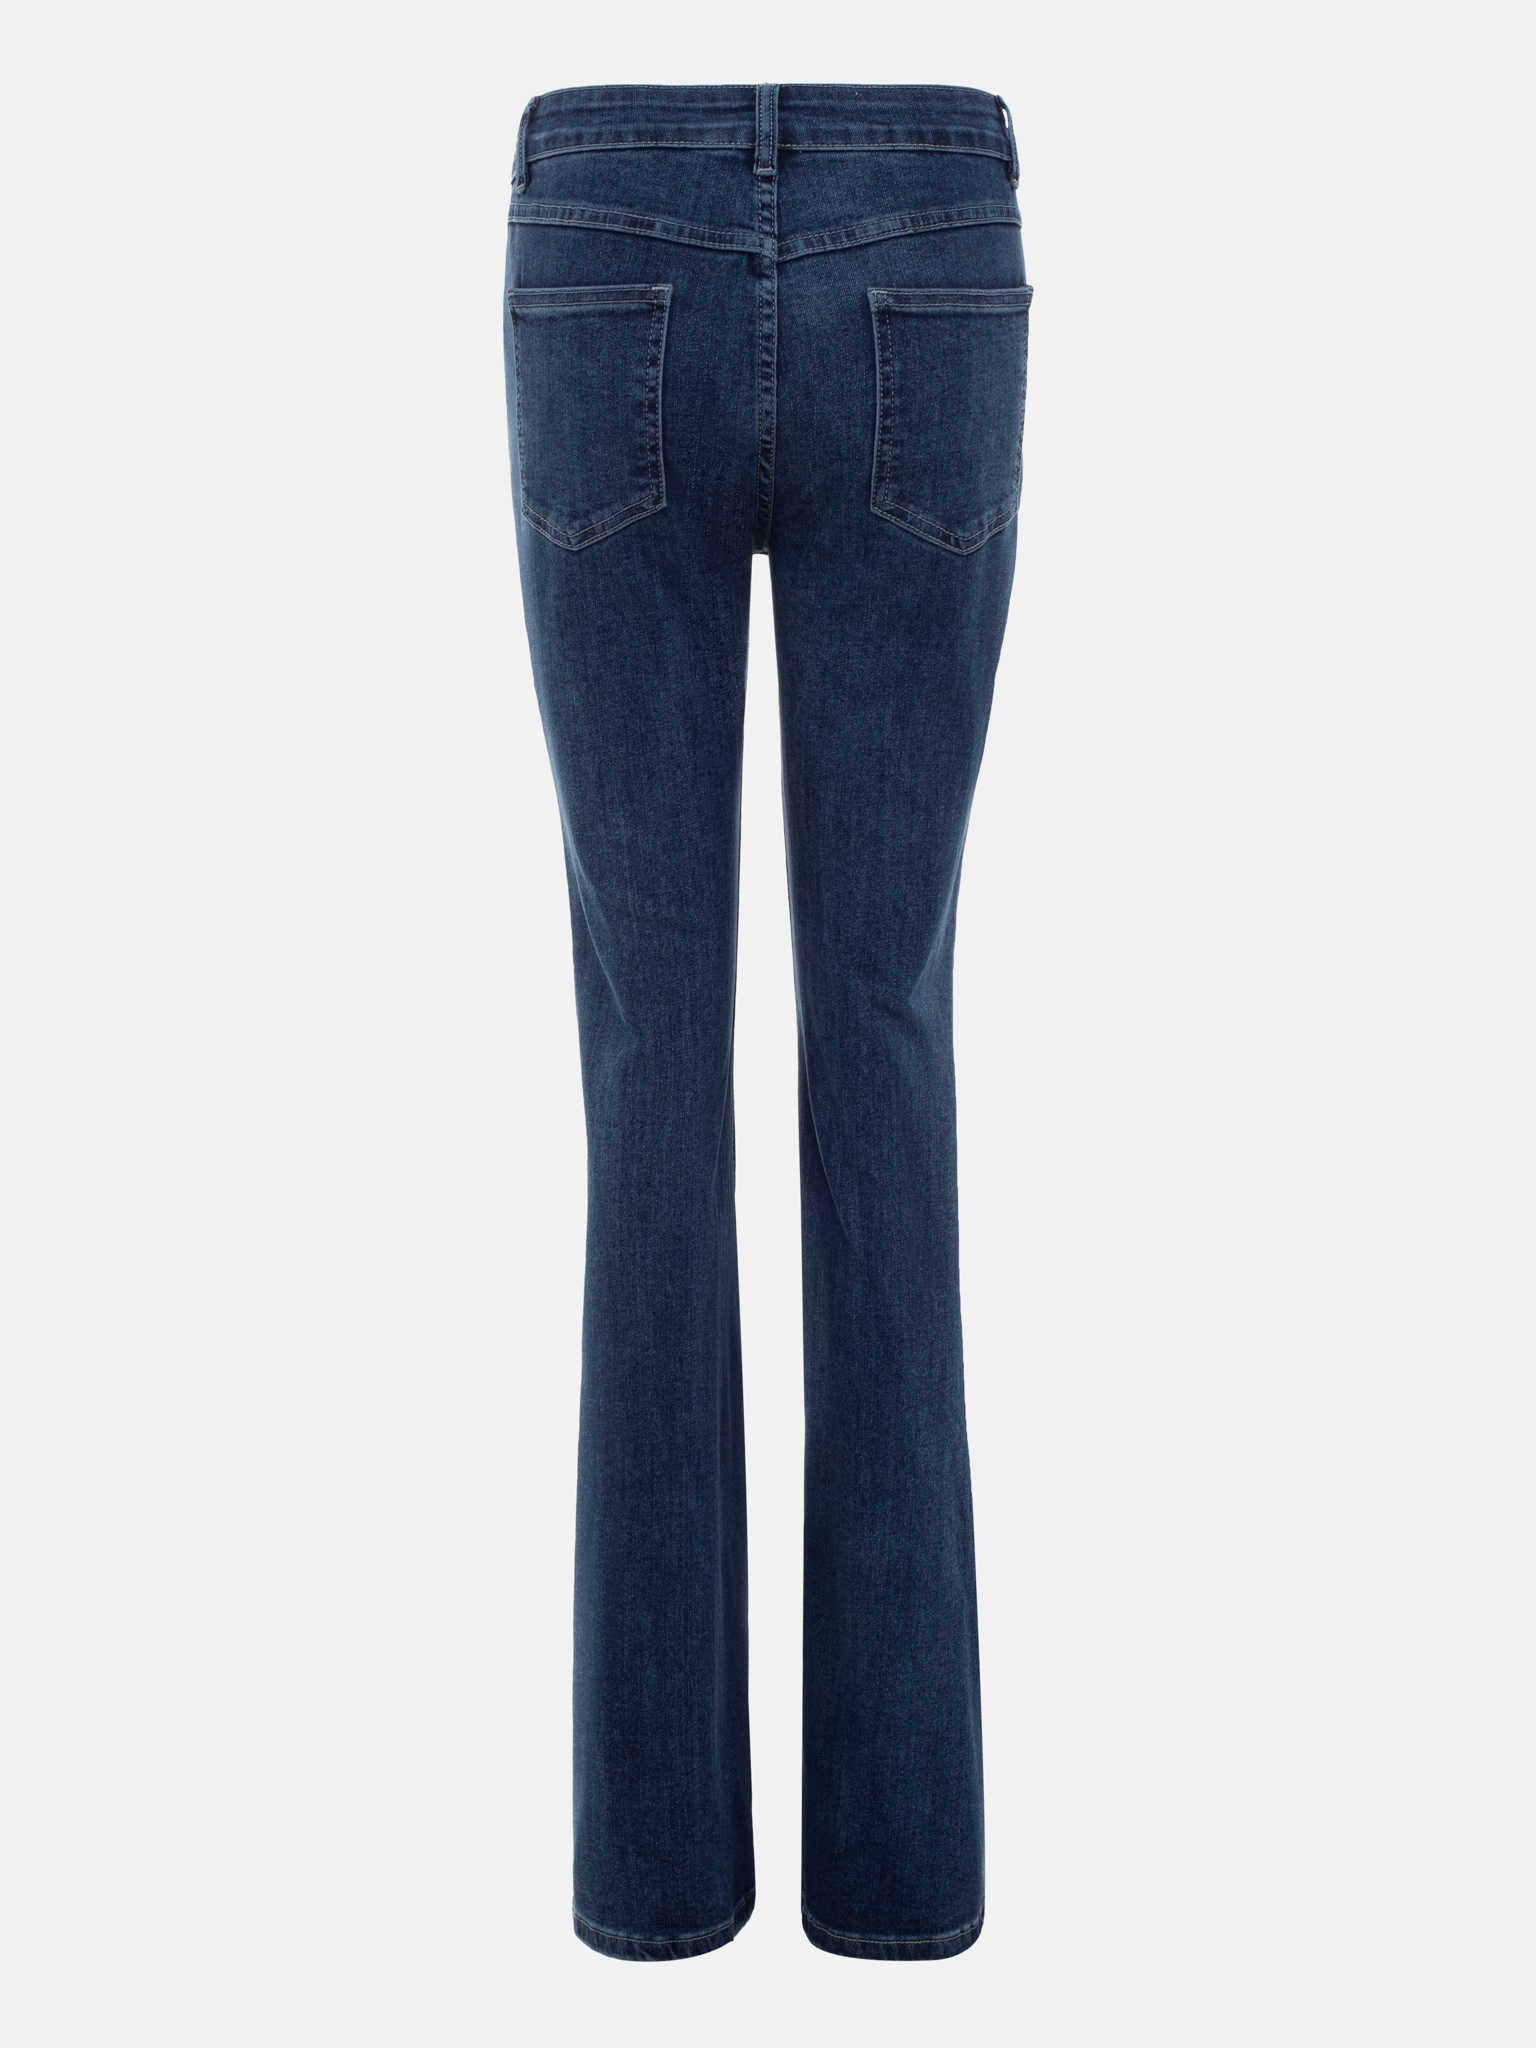 Flared jeans with square-shape pockets :: LICHI - Online fashion store